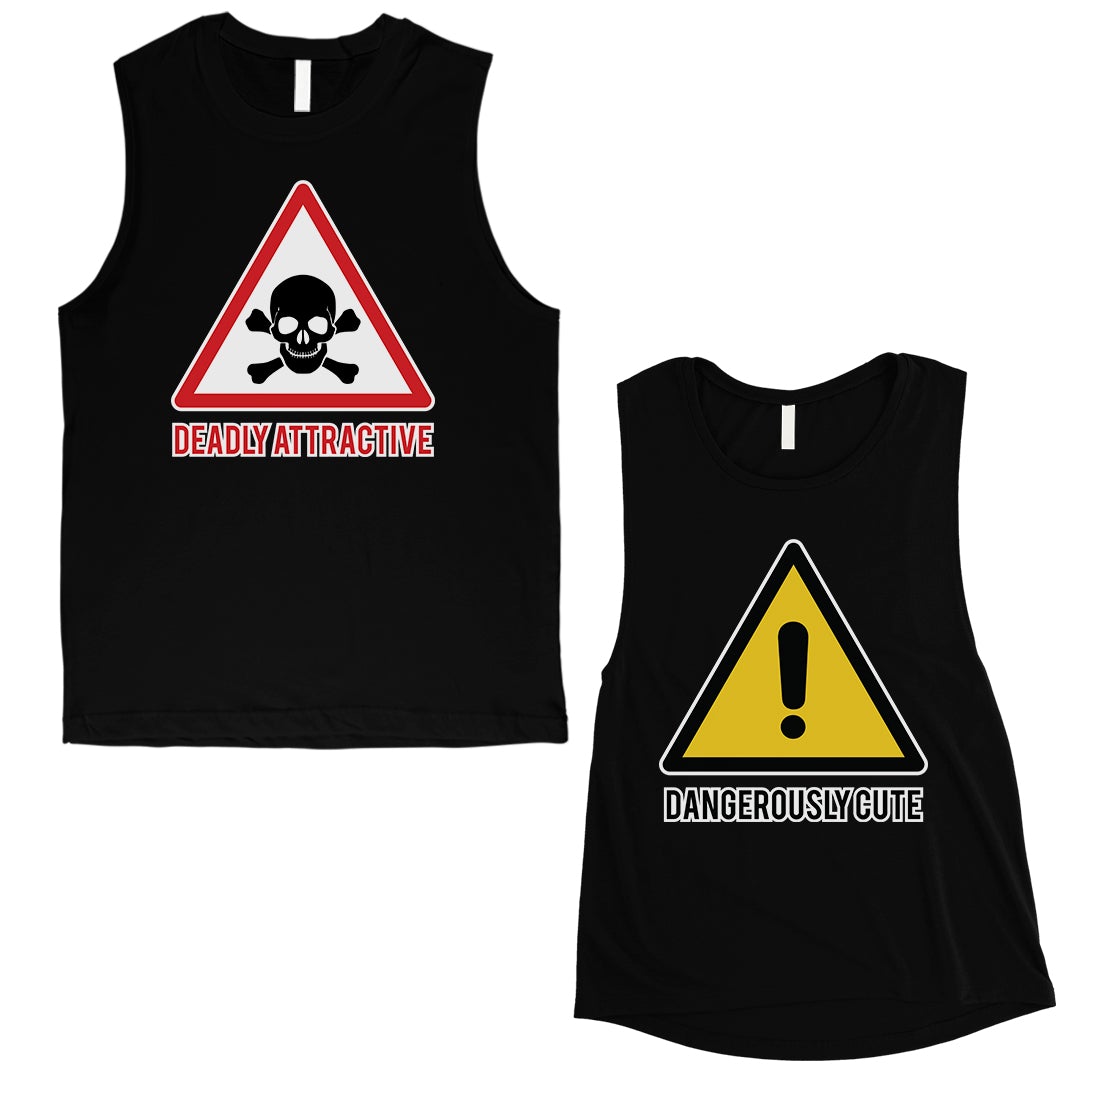 Attractive & Cute Matching Muscle Tank Tops Valentine's Day Gift Black